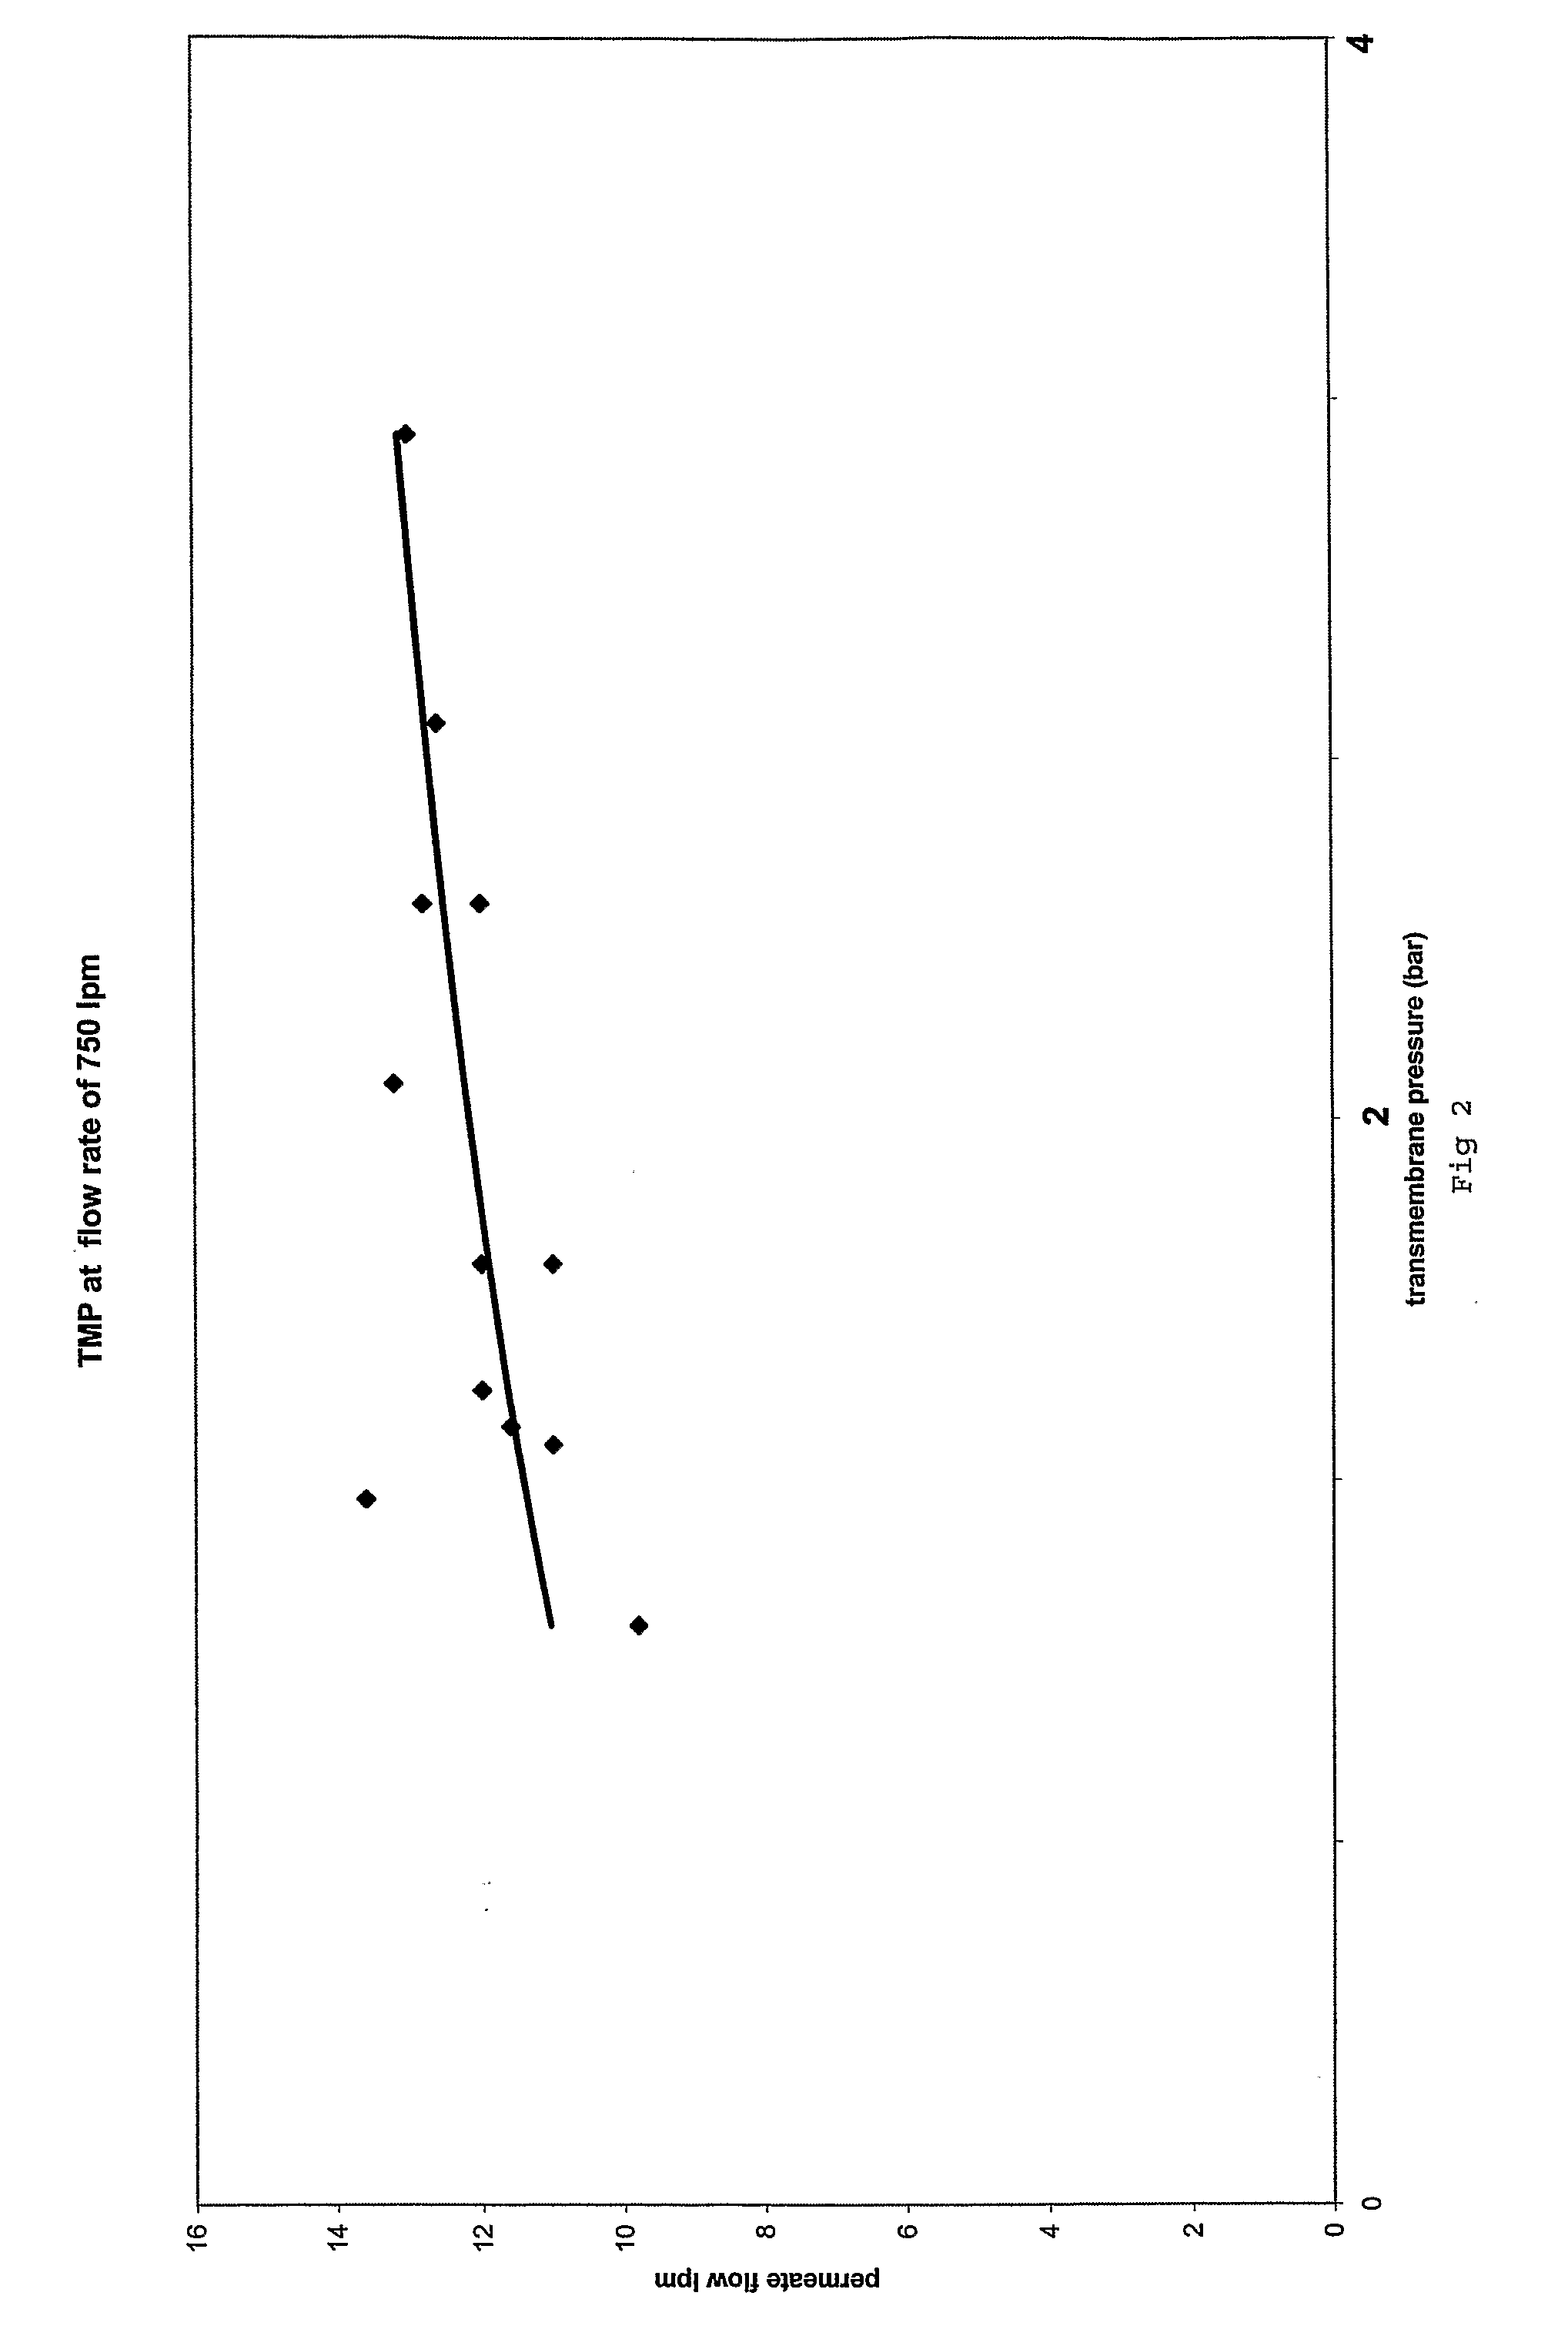 Hydrolysed Marine Protein Product, Process for the Production Thereof, and Application